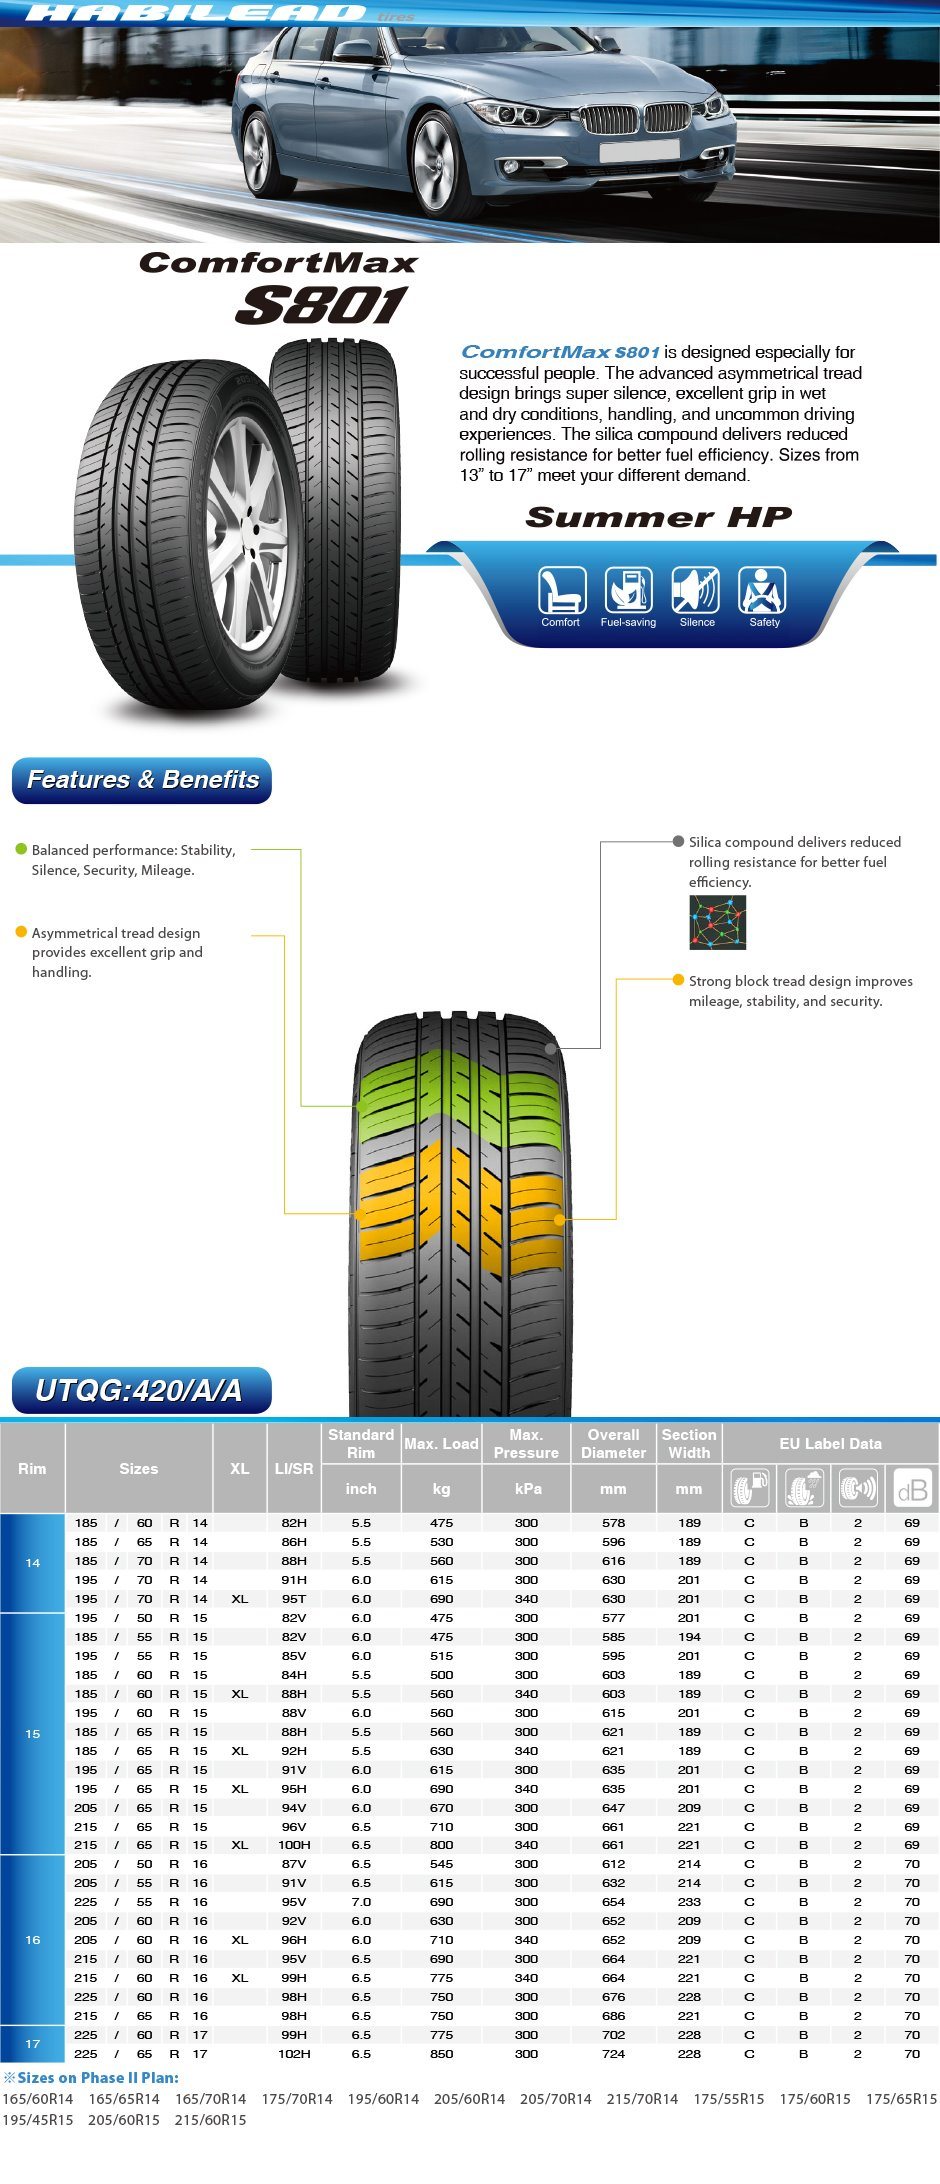 Label Certificate Approved Car Tires, PCR Tires and Passenger Car Tires